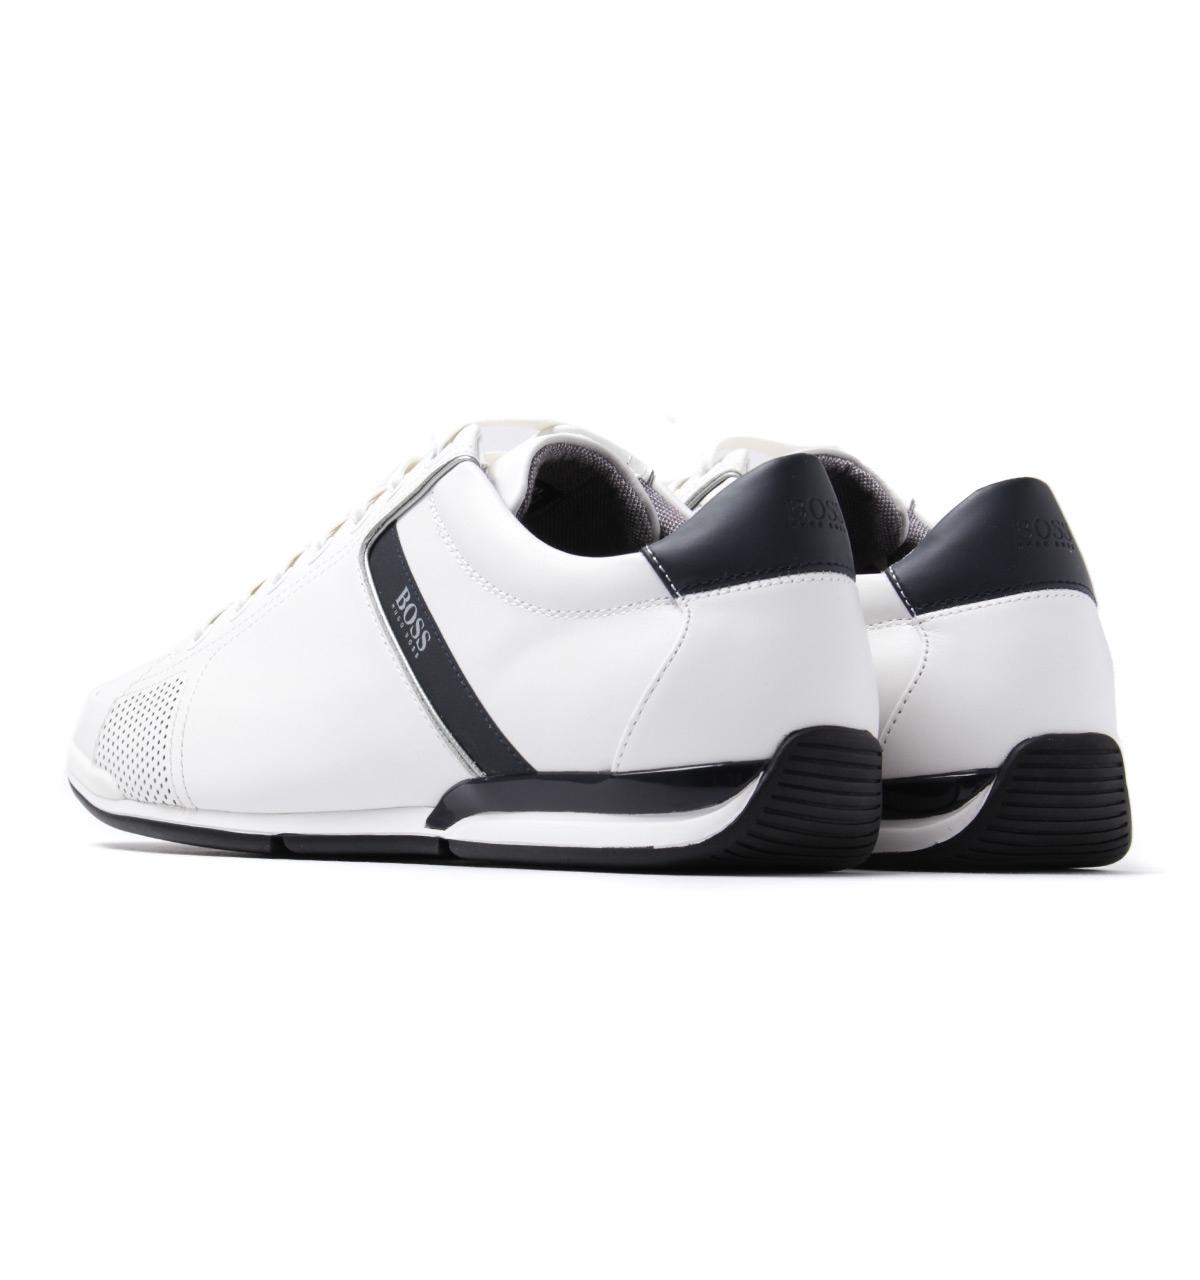 boss saturn leather trainers